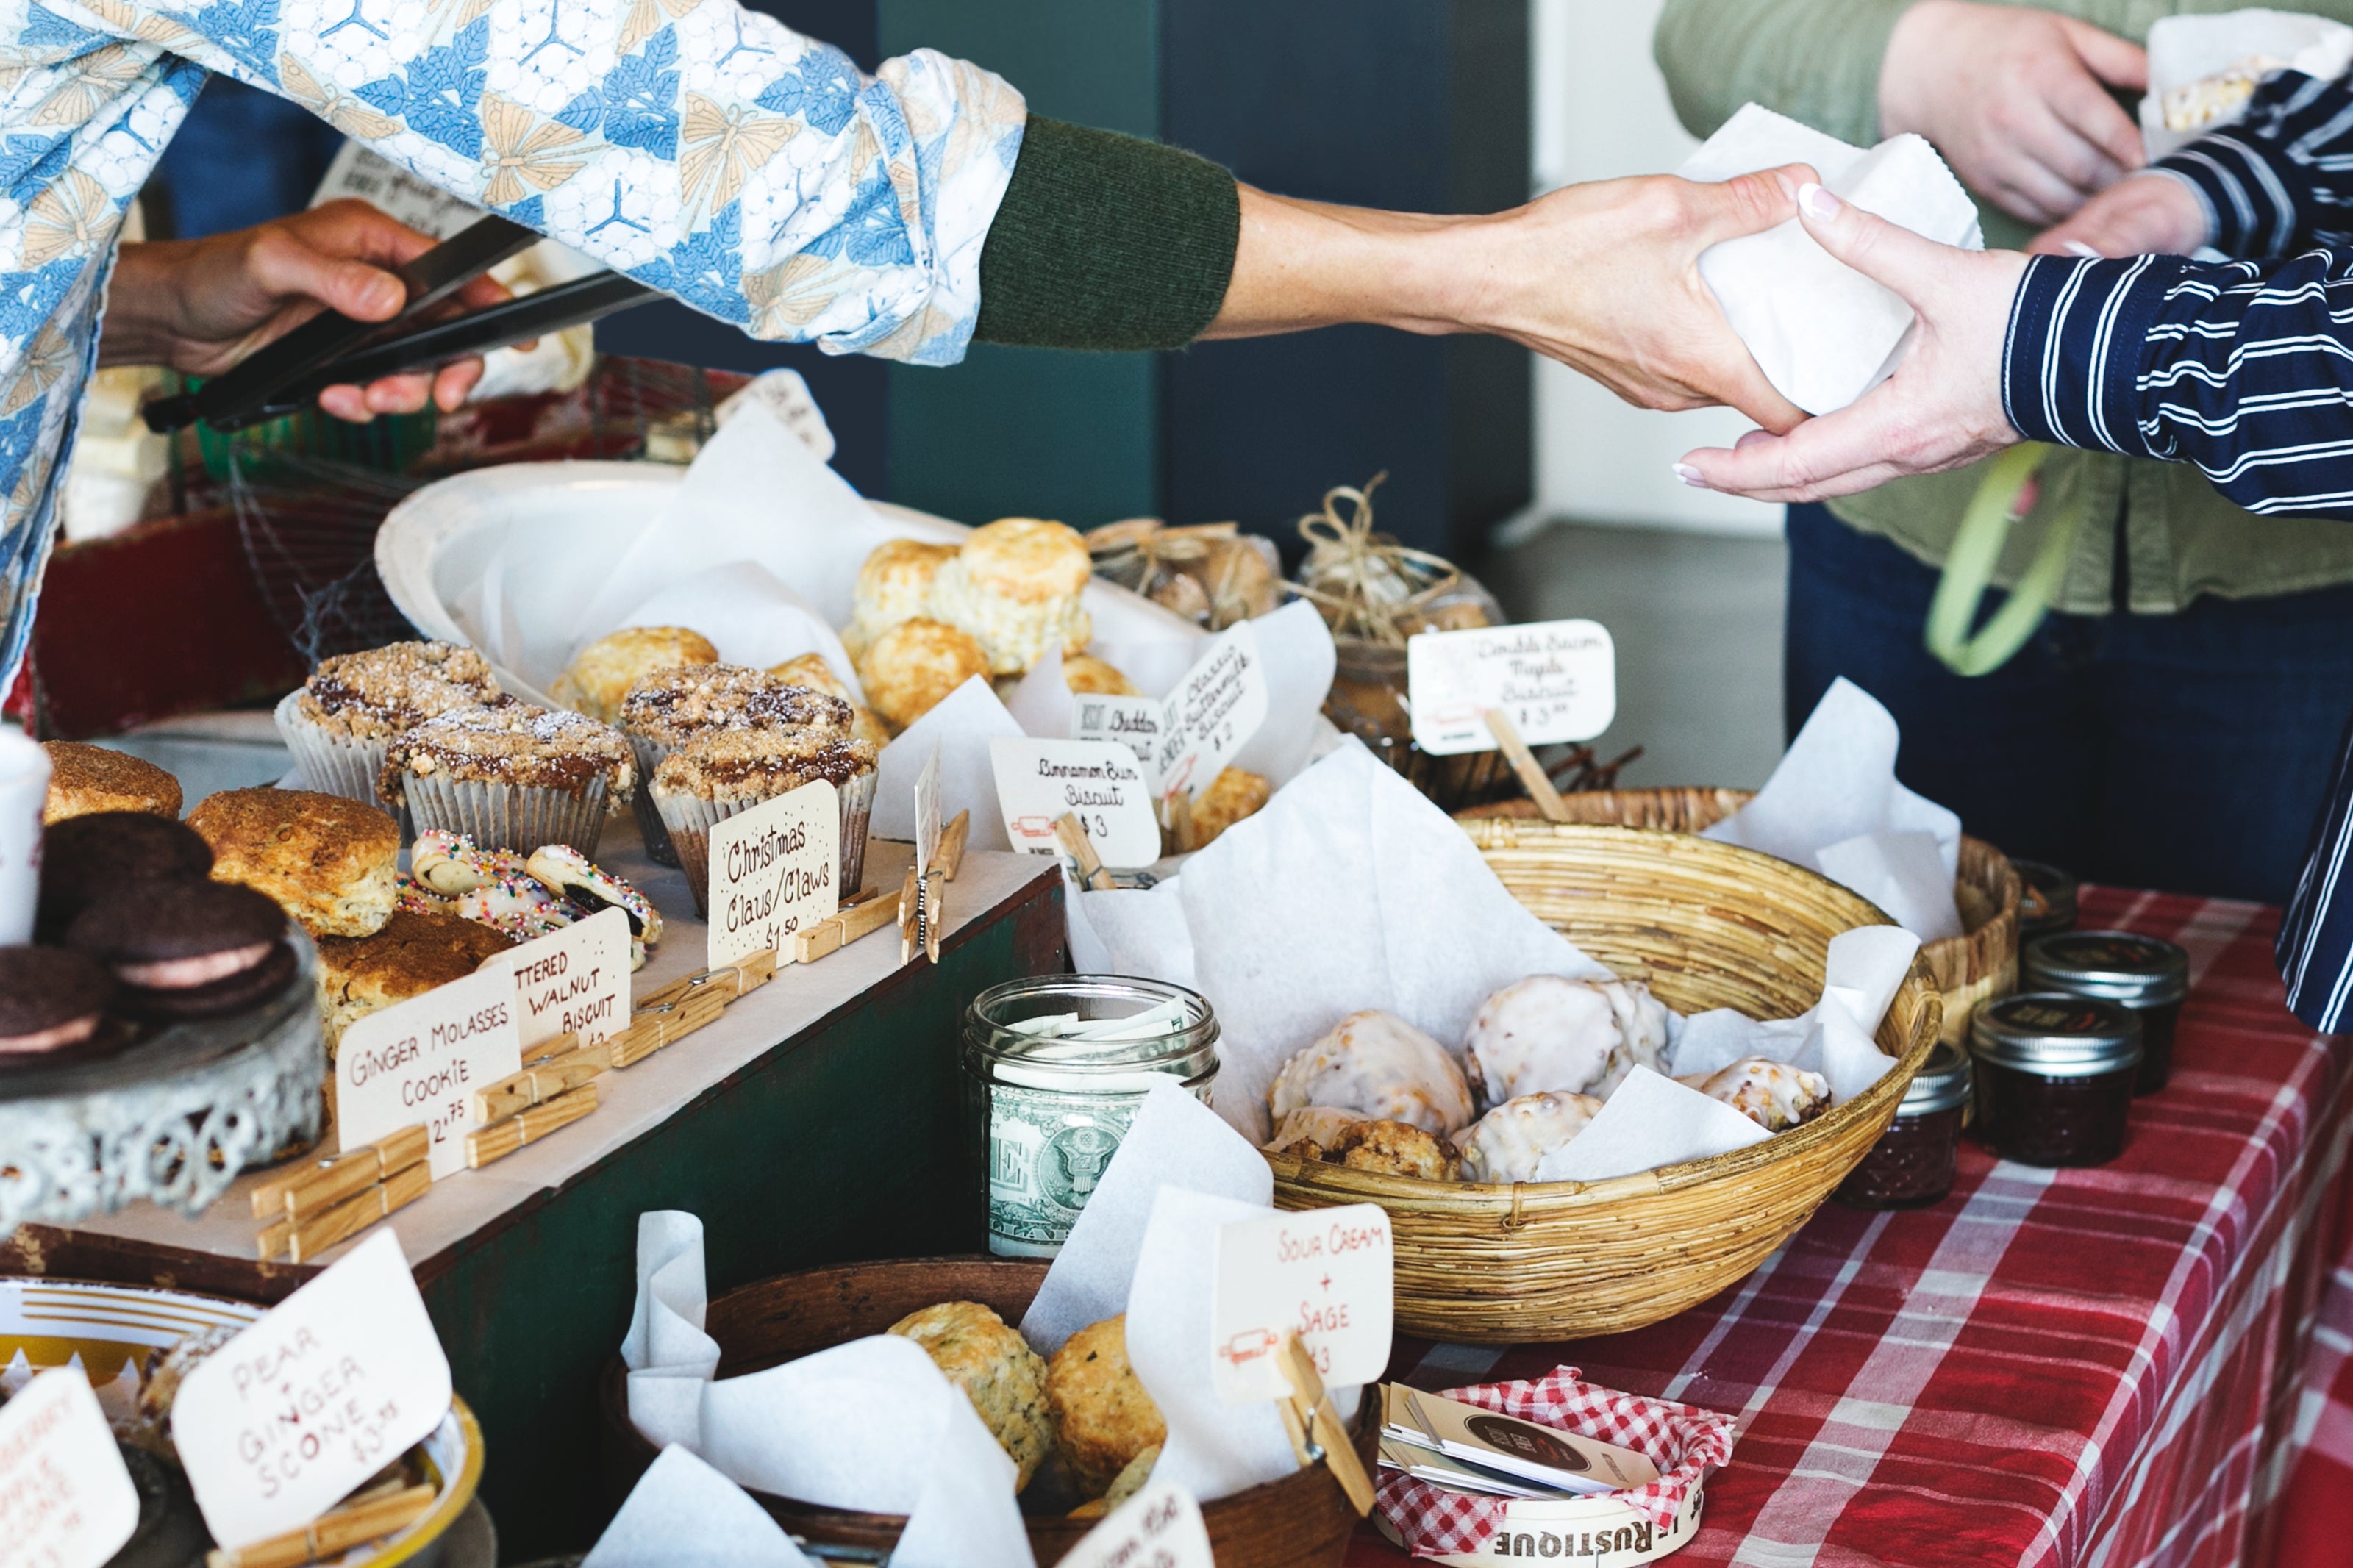 Bakery stand at a Farmers Market - Muffins, Scones, and more Pastries on a Two-Tiered Table